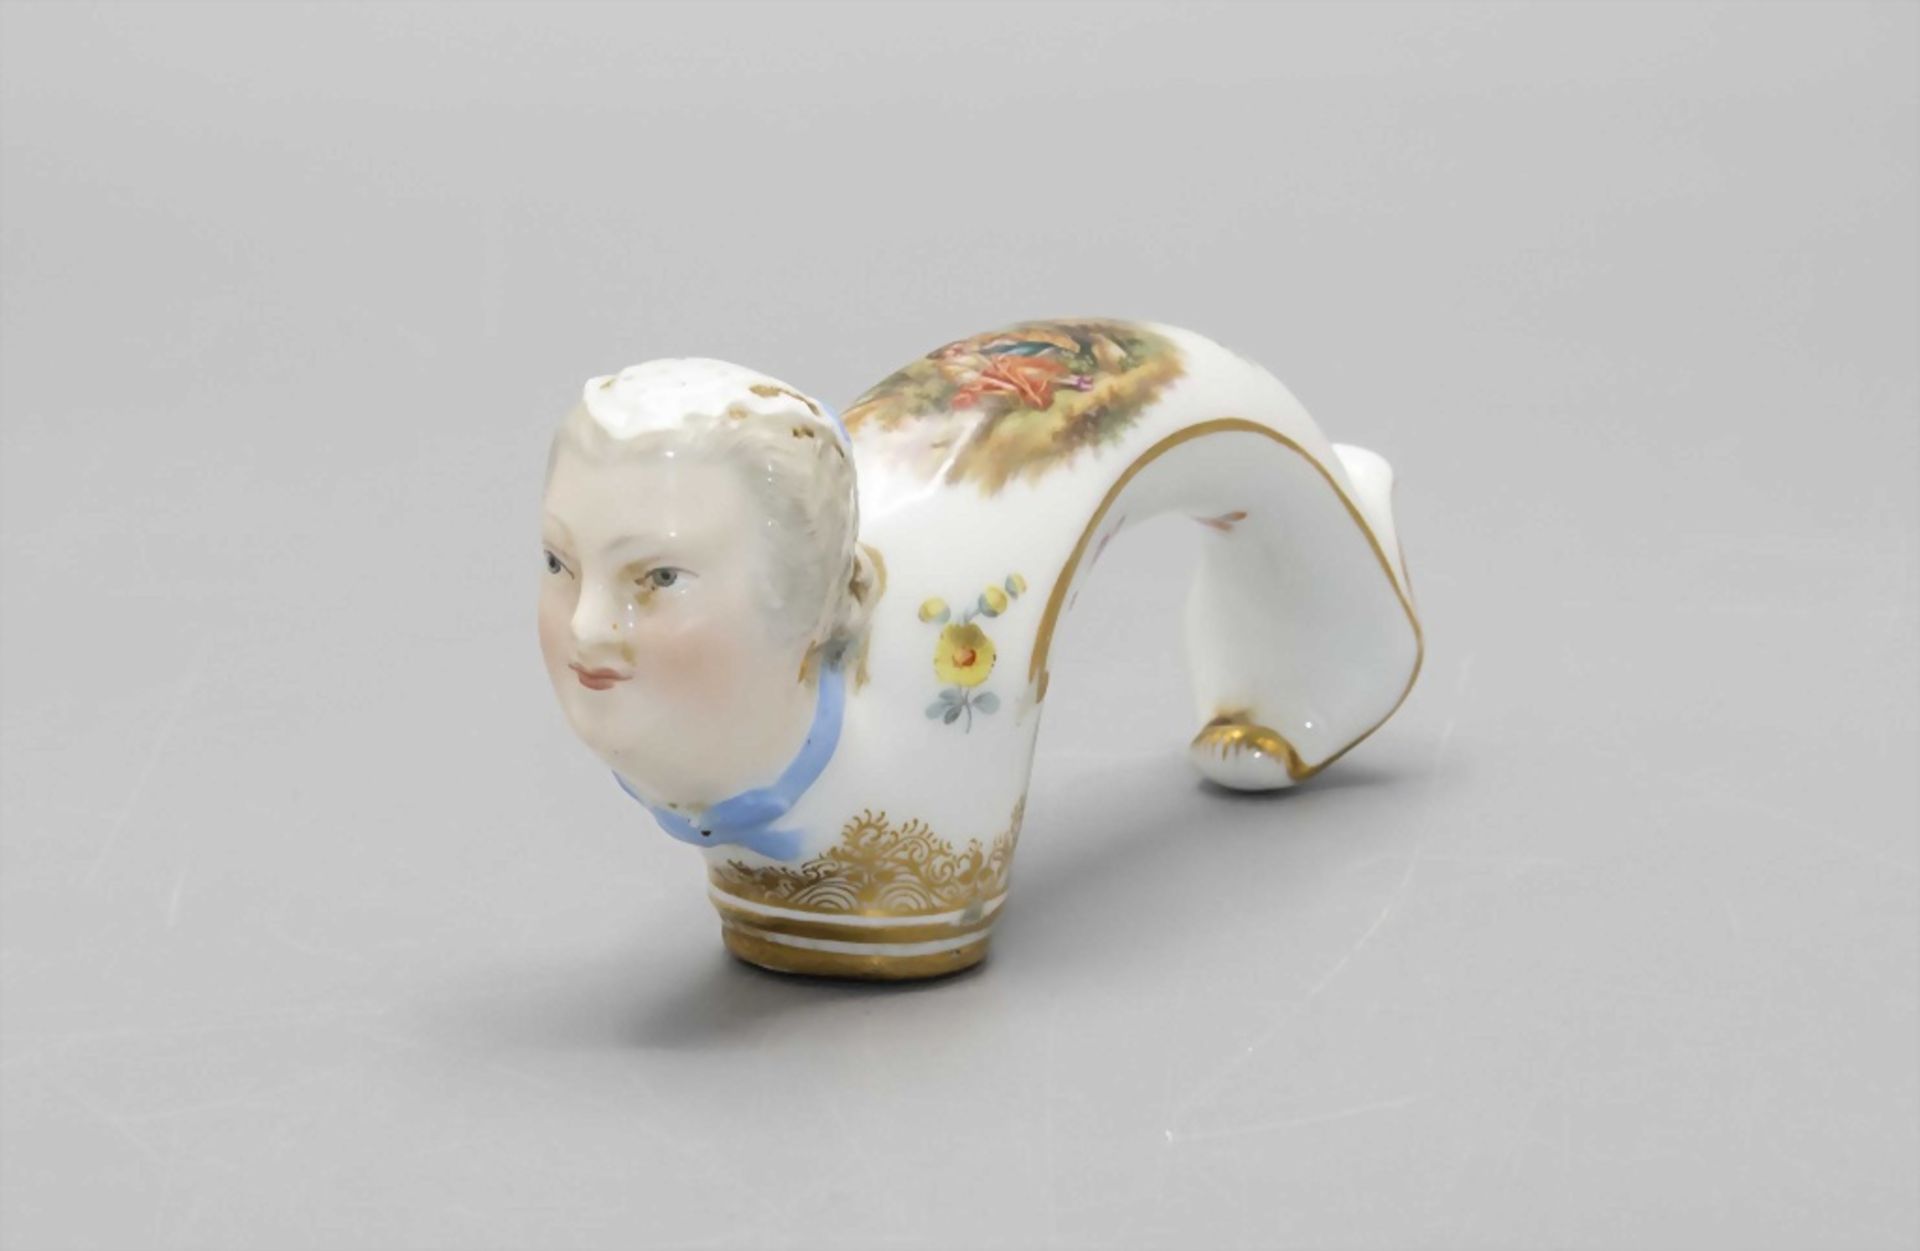 Stockgriff mit Frauenkopf und Watteau-Szene / A cane handle with the head of a woman and a ... - Image 2 of 6